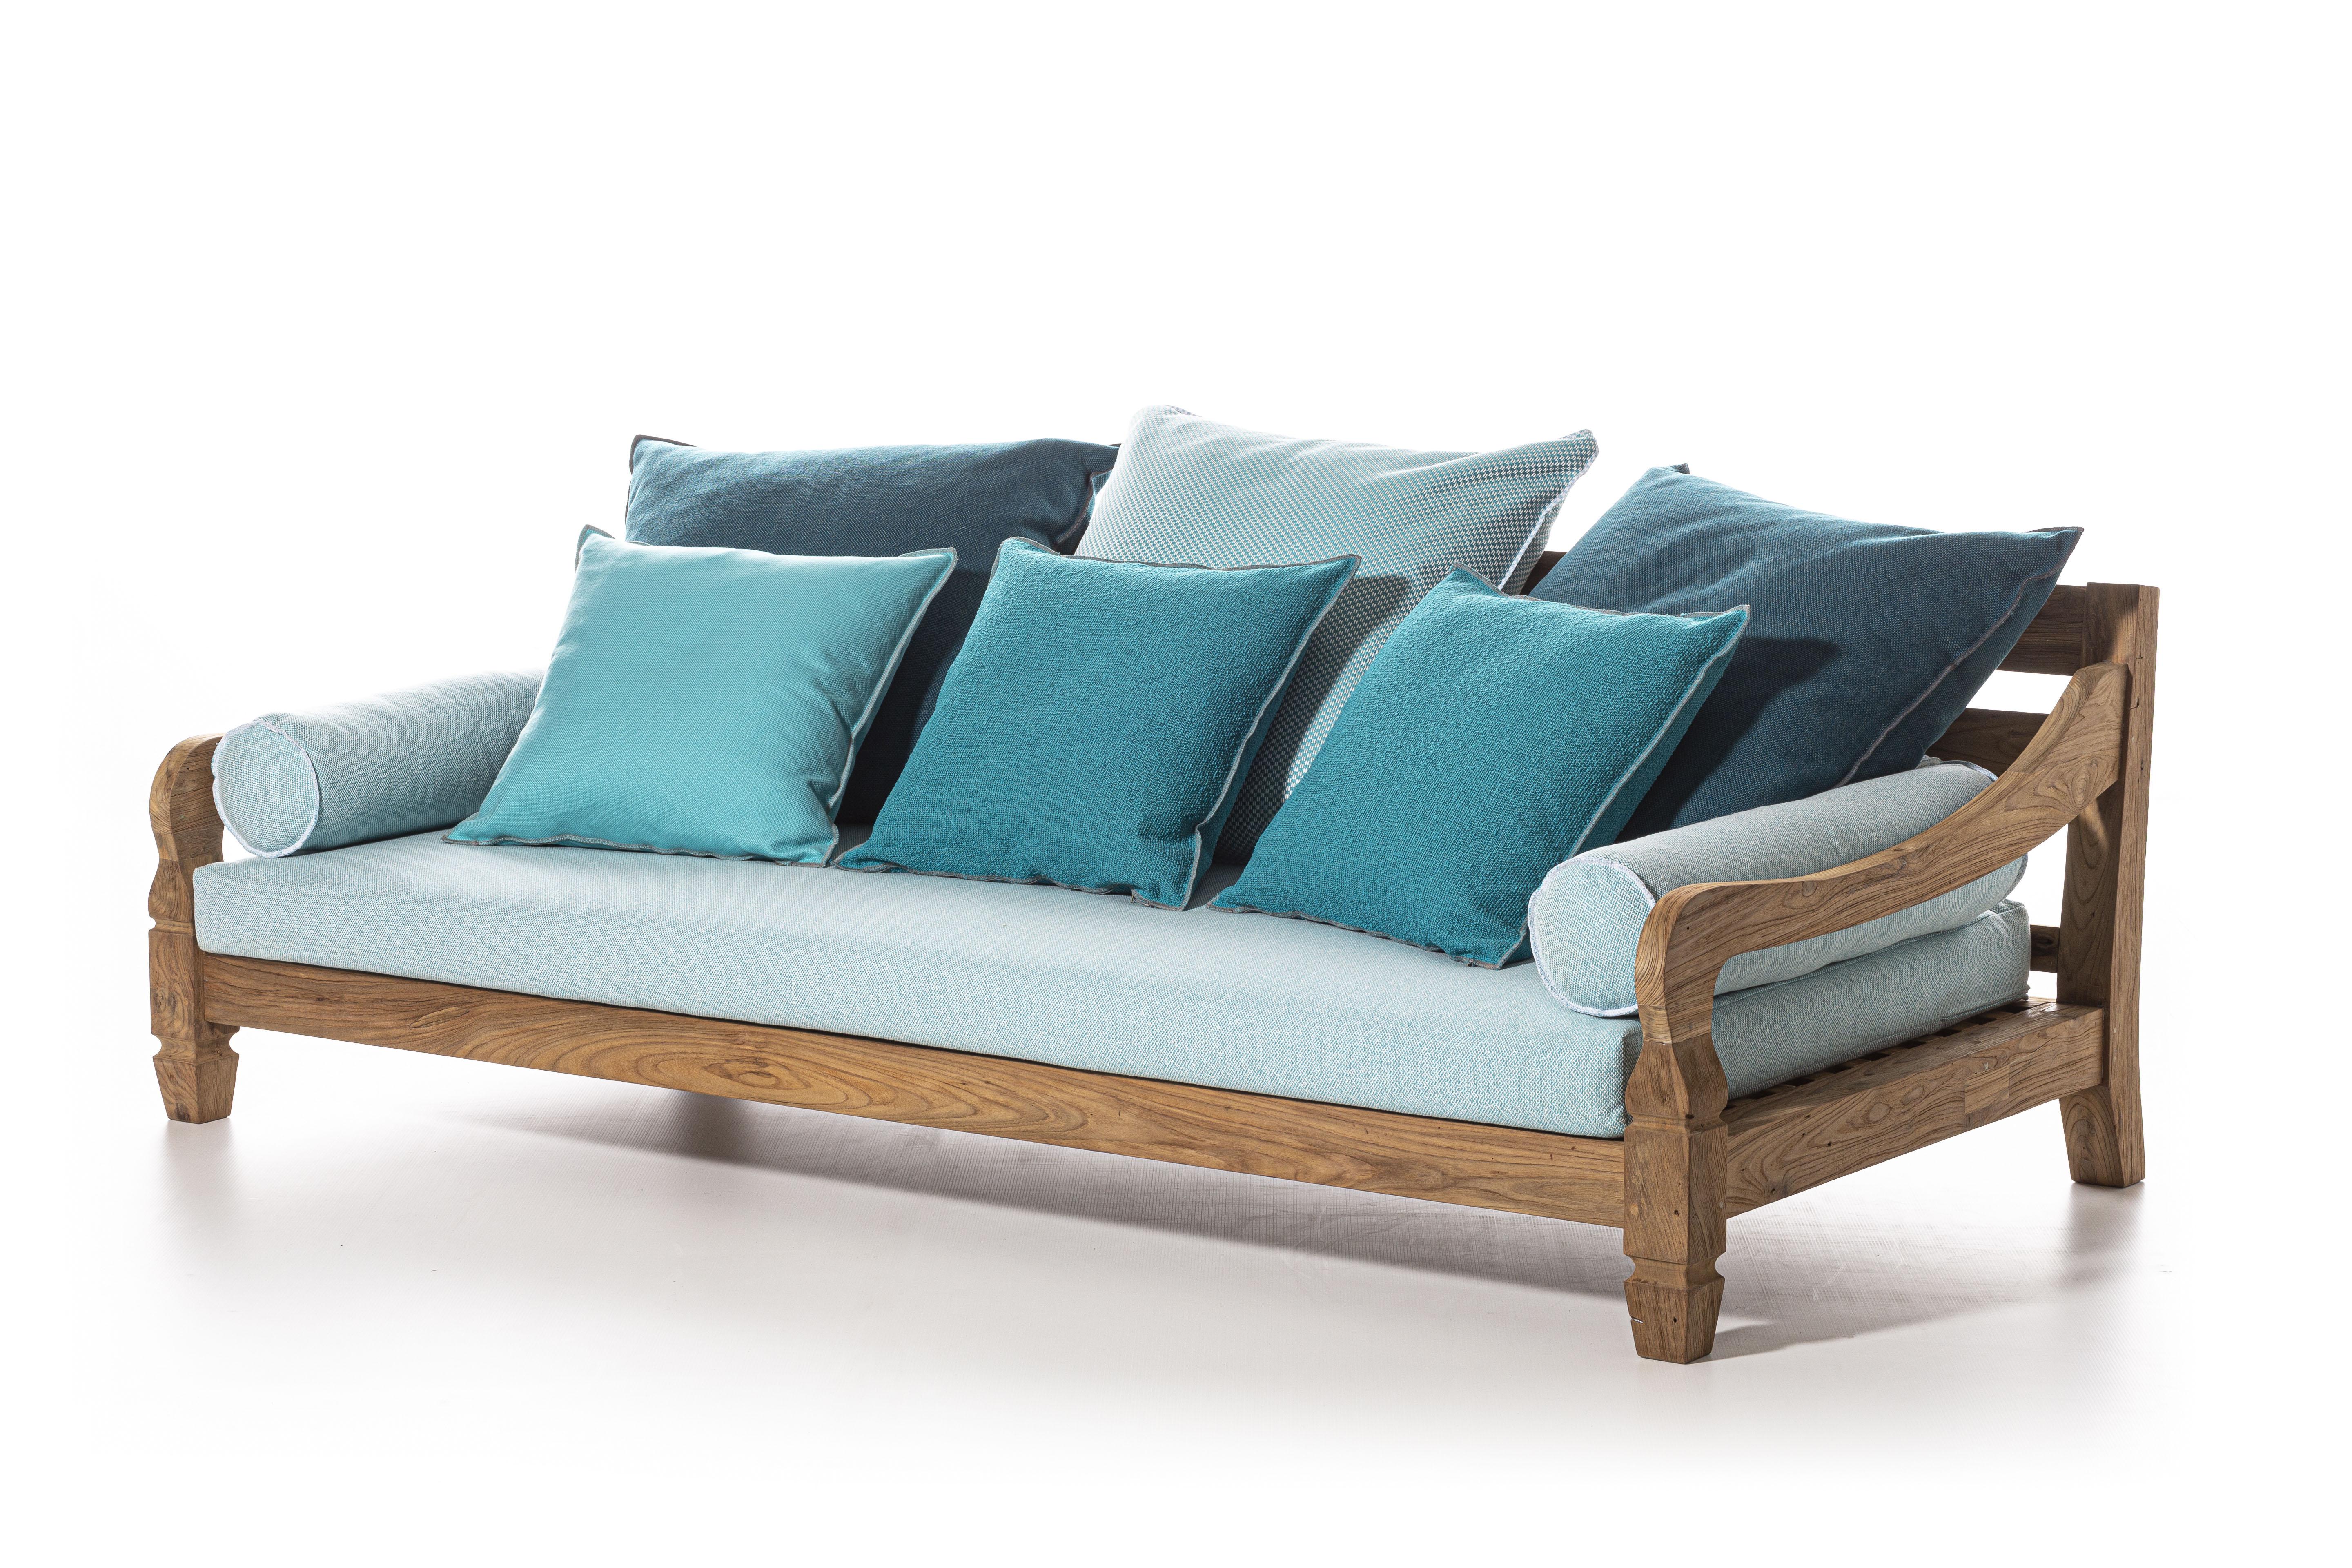 The sofa in colonial style of exotic inspiration, Jeko 04 has a structure made of ECOTeak, a material coming from the reuse of recovered beams and teak elements that have been repaired with recycled wood, assembled and polished to highlight the